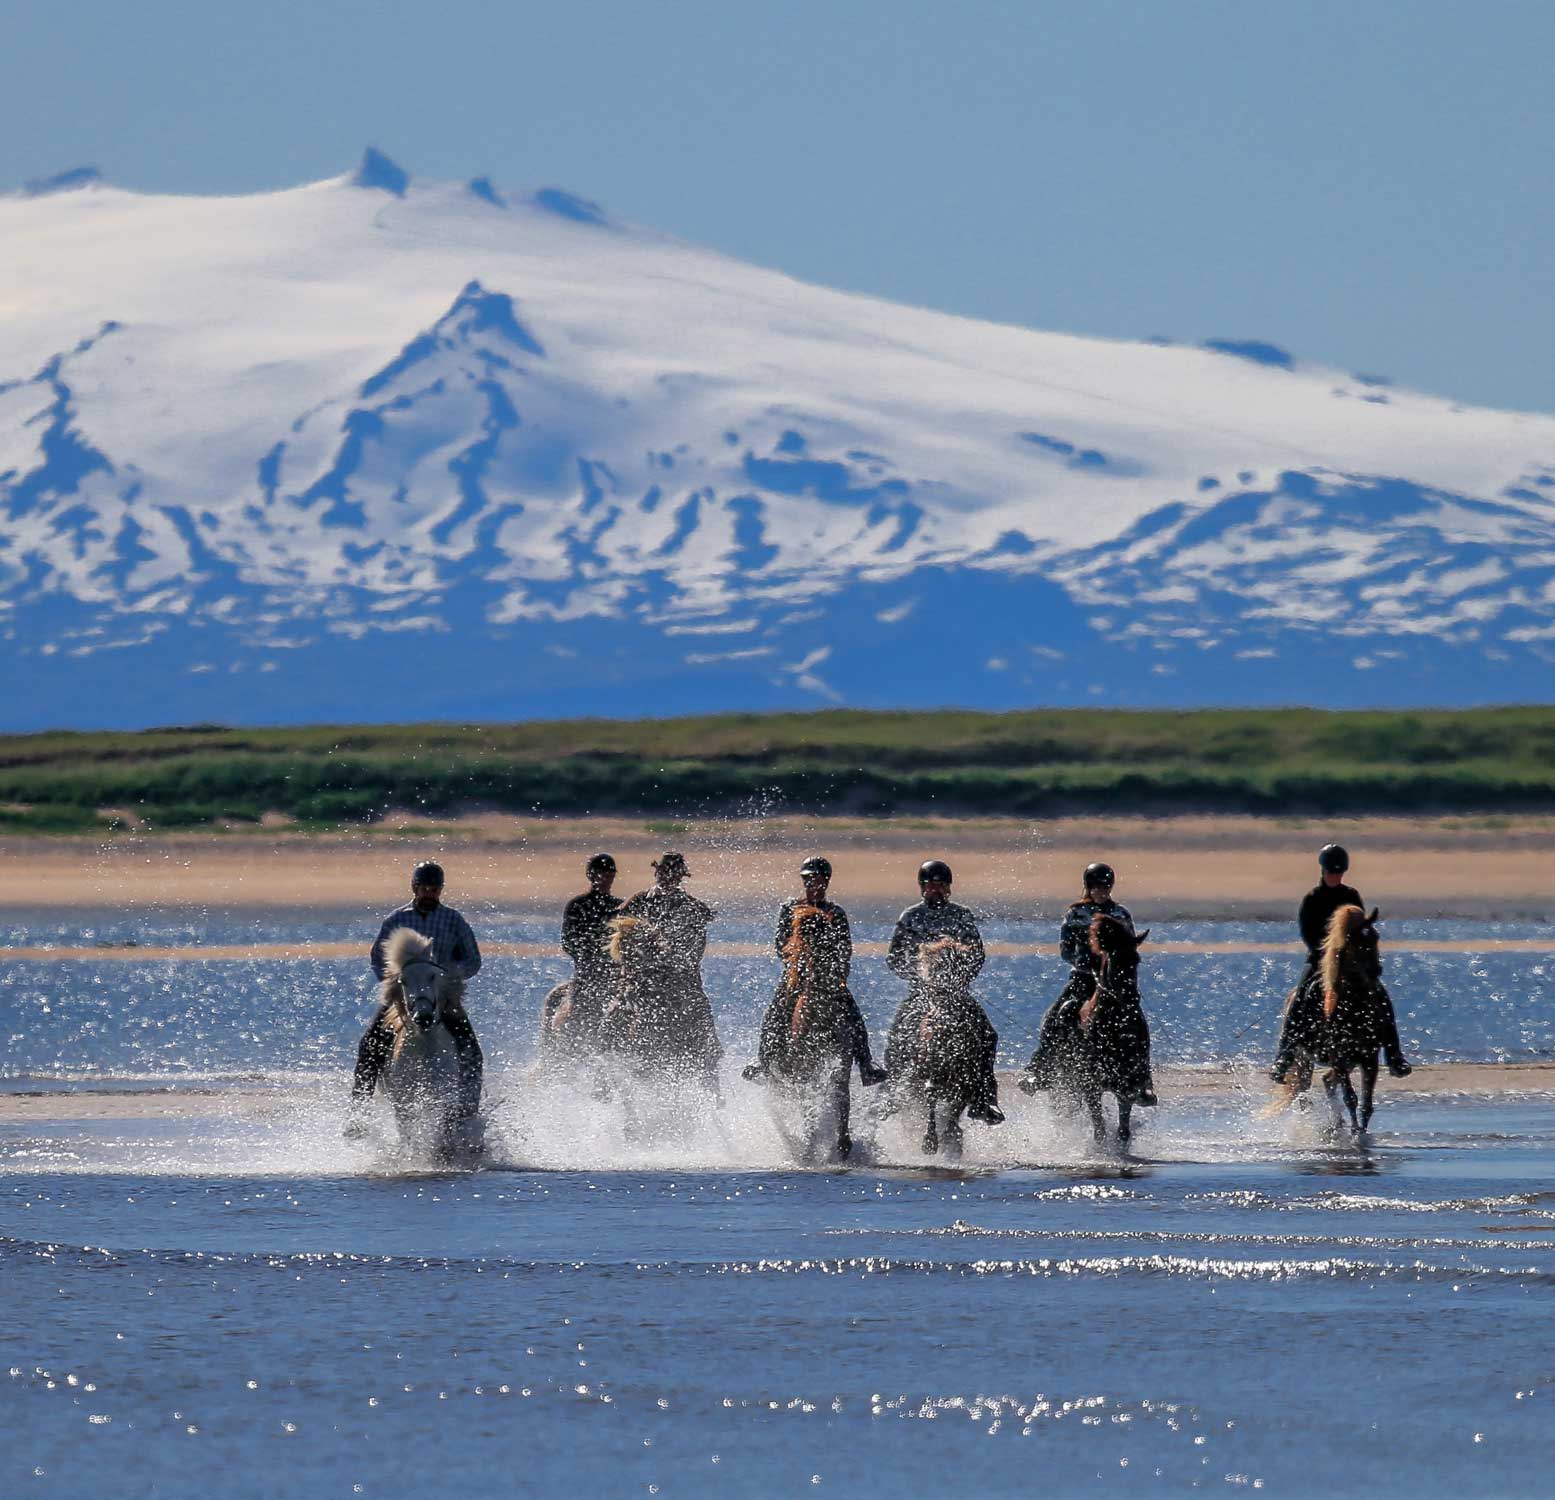 Horseback riding in Iceland https://guidetoiceland.is/book-trips-holiday/adventure-tours/horse-riding